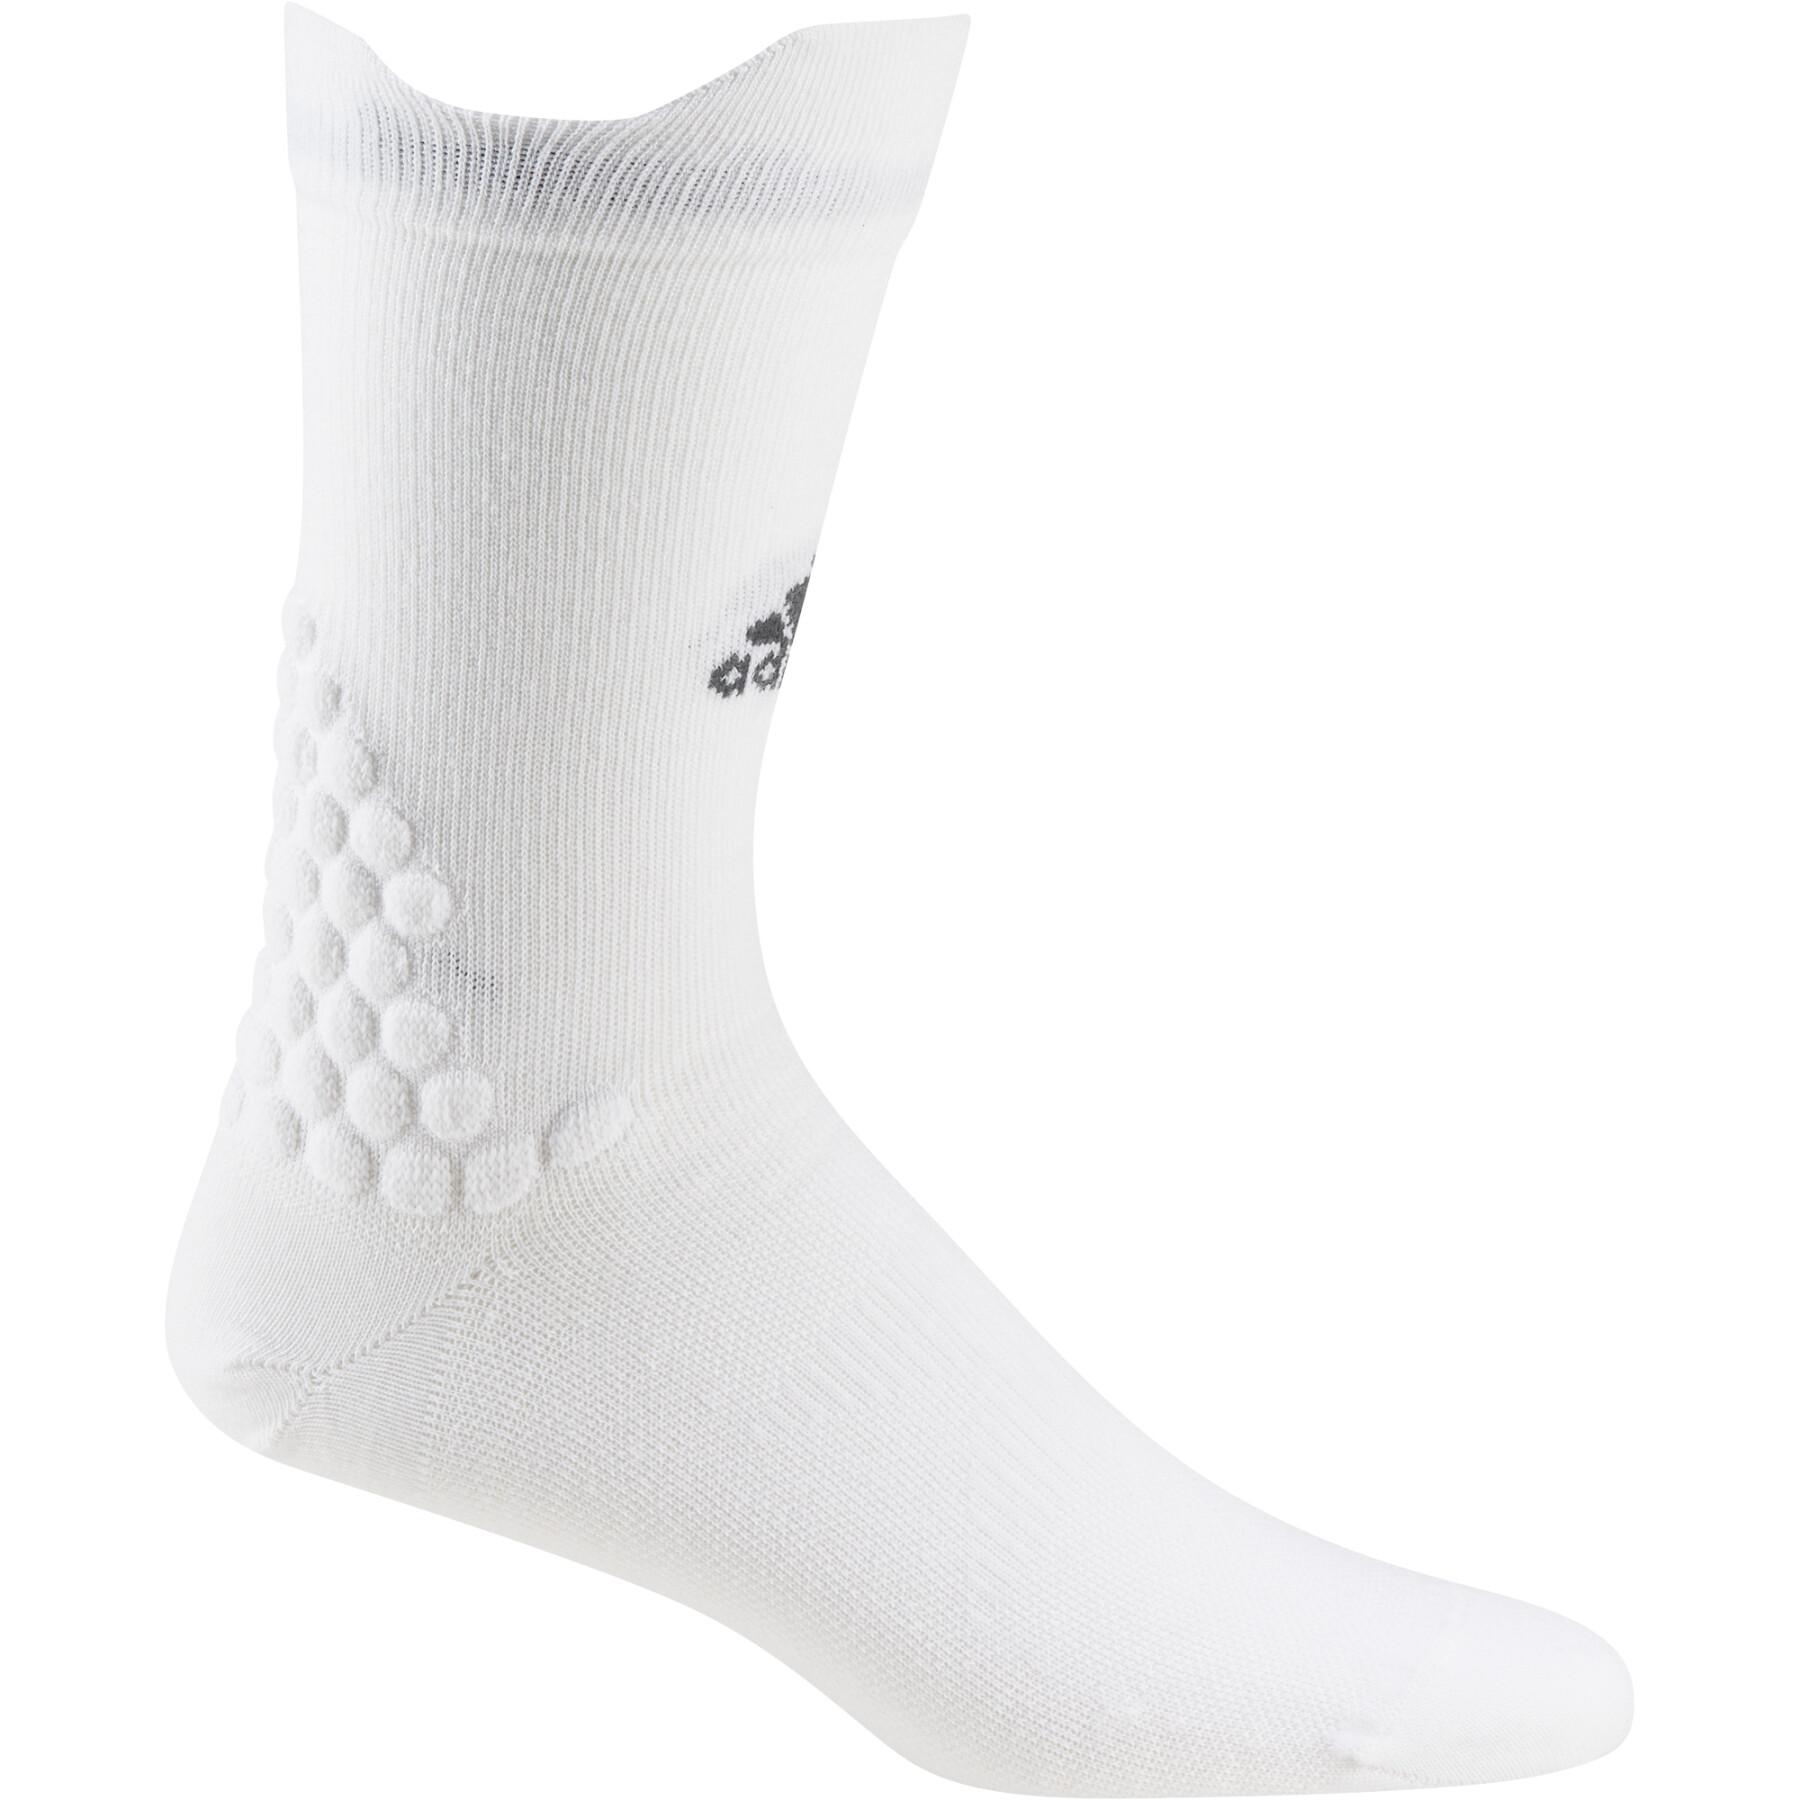 Chaussettes adidas X Ub22 Recycled